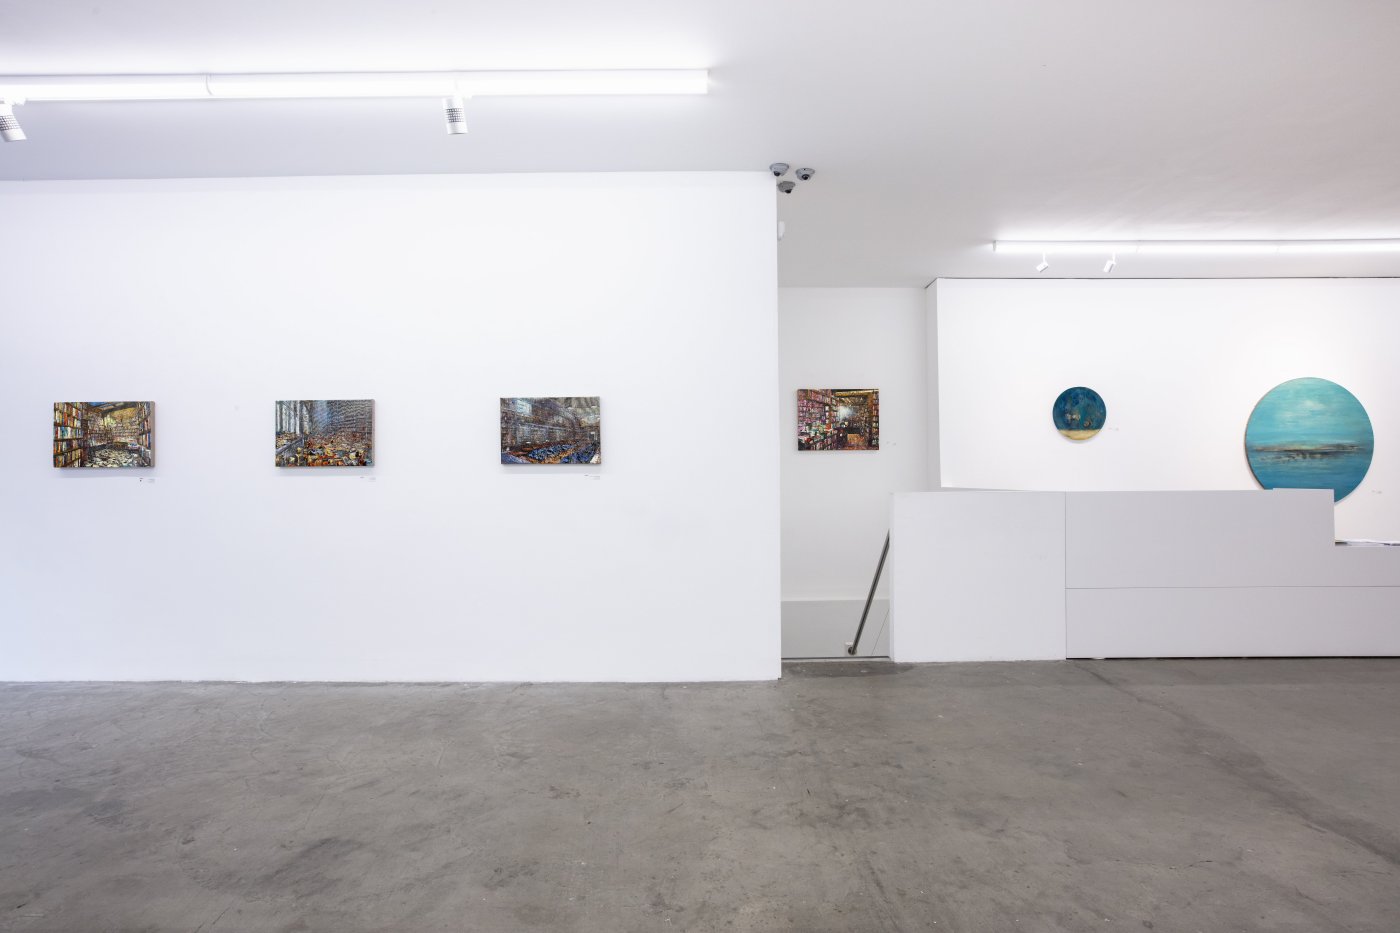 Installation image for Through the Mind's Eye: an Anthology, at Pontone Gallery